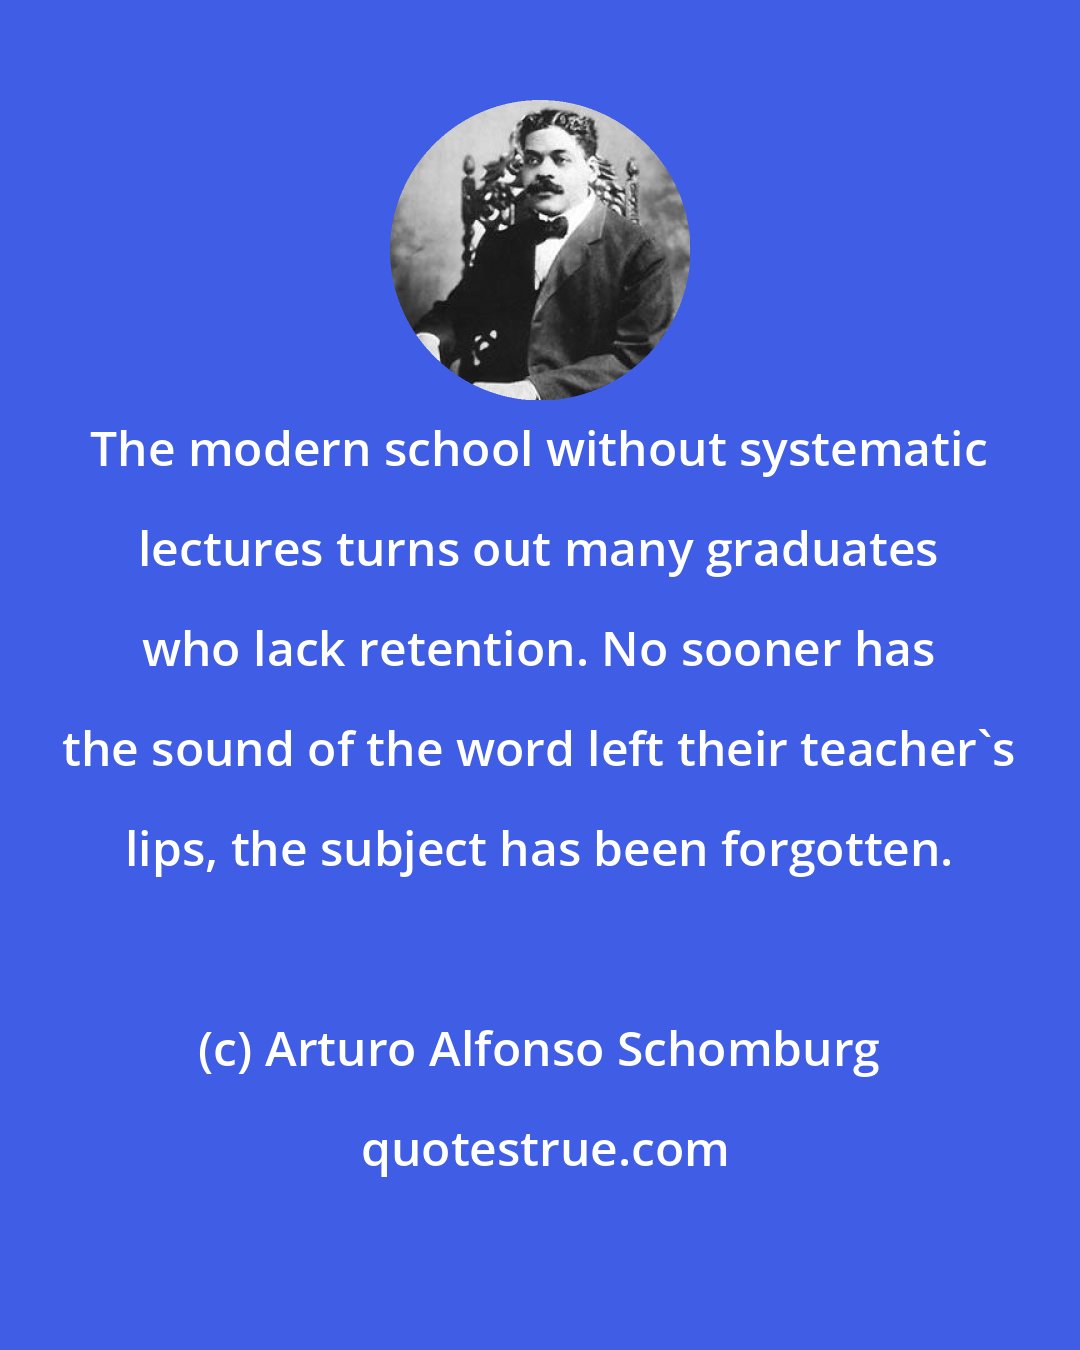 Arturo Alfonso Schomburg: The modern school without systematic lectures turns out many graduates who lack retention. No sooner has the sound of the word left their teacher's lips, the subject has been forgotten.